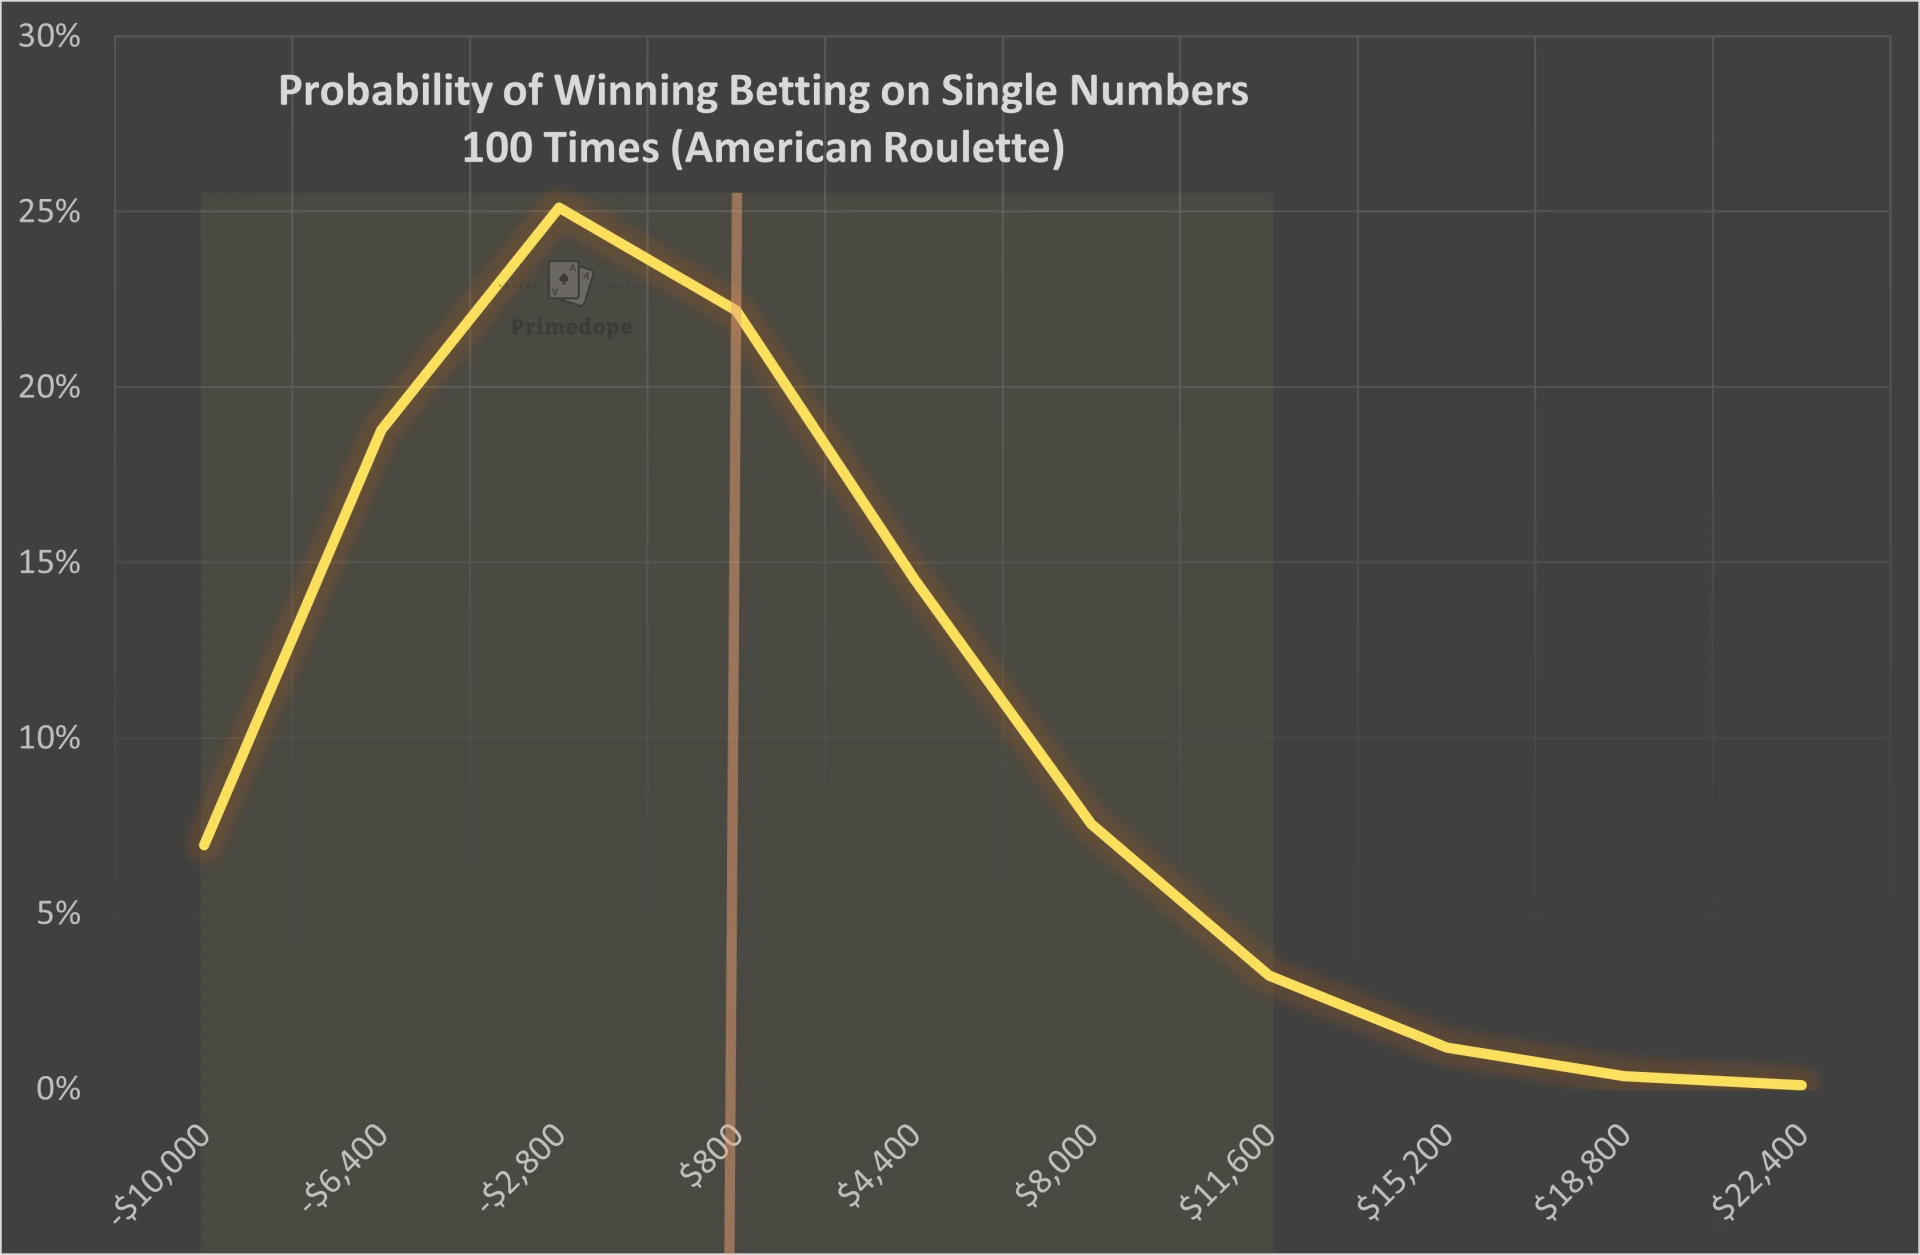 Probability distribution when betting on single numbers 100 times (American Roulette)